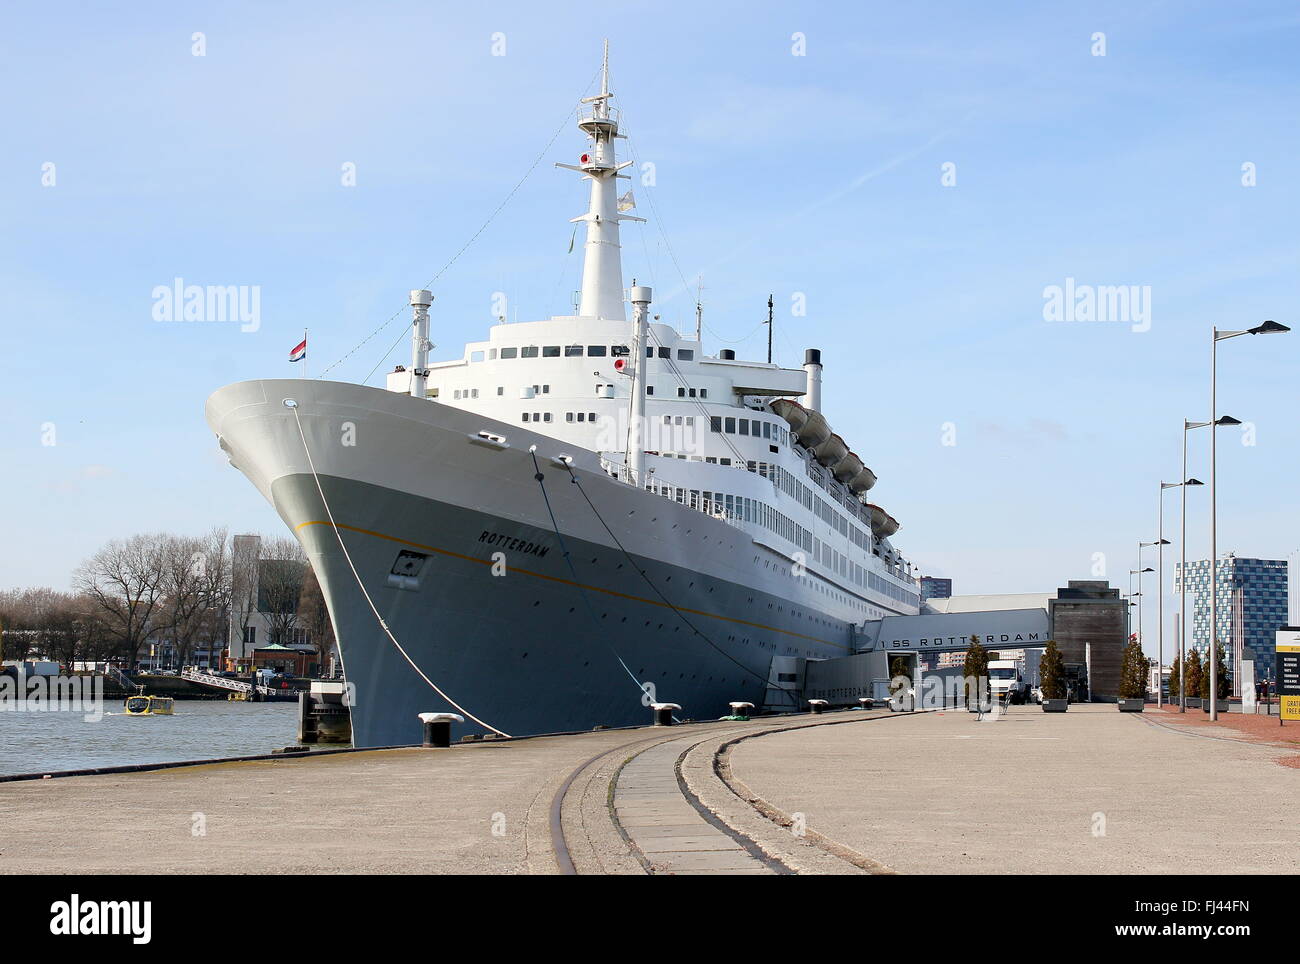 Ss rotterdam hi-res stock photography and images - Alamy